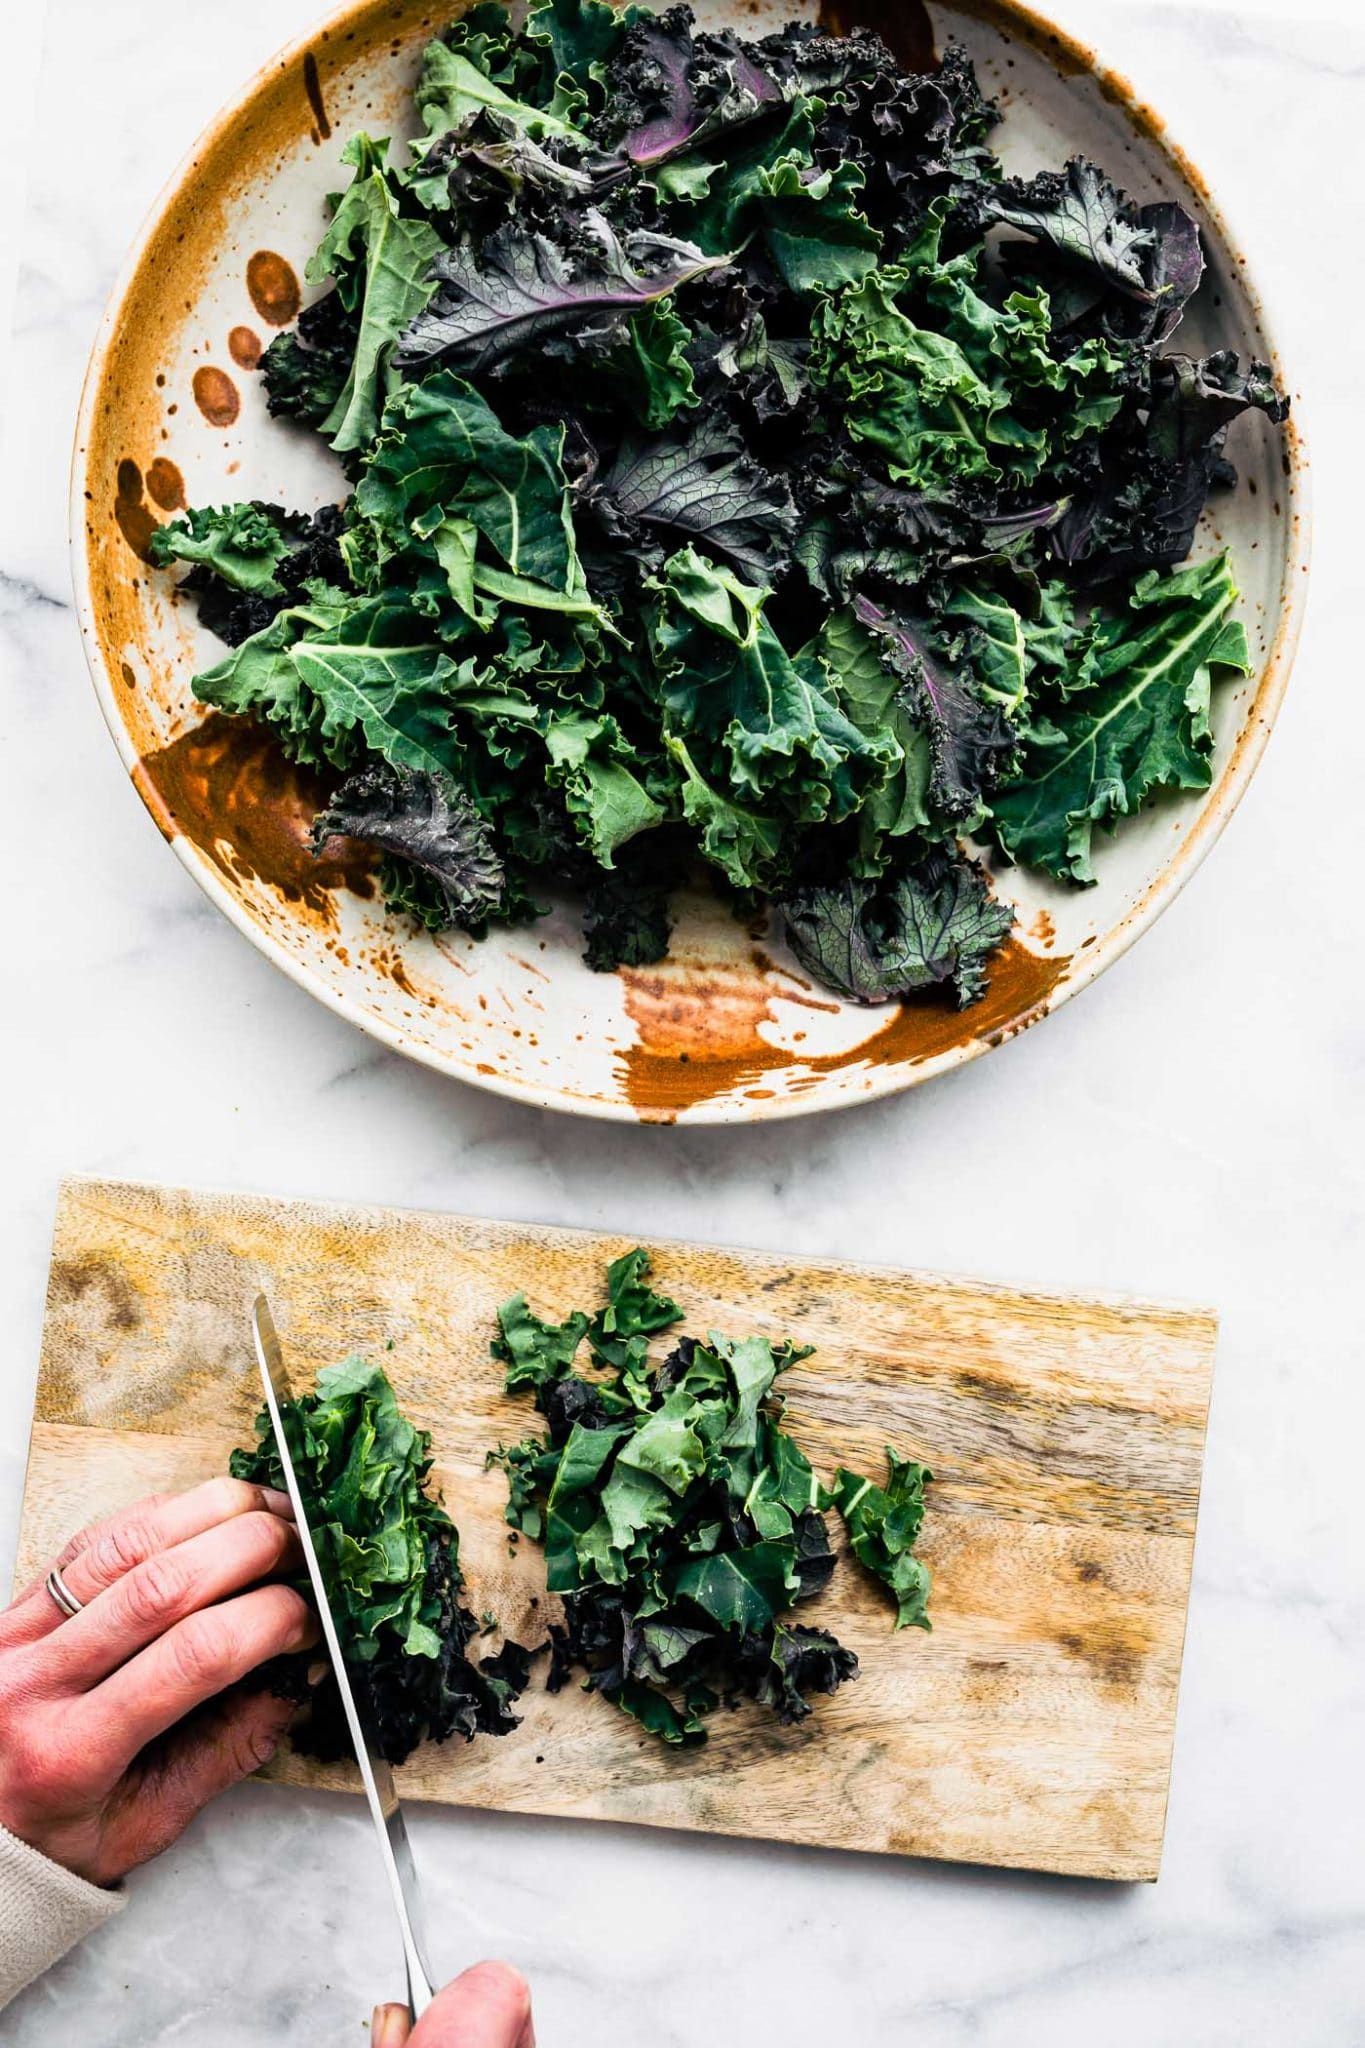 a bowl of kale leaves and a woman's hands cutting kale on a wooden cutting board